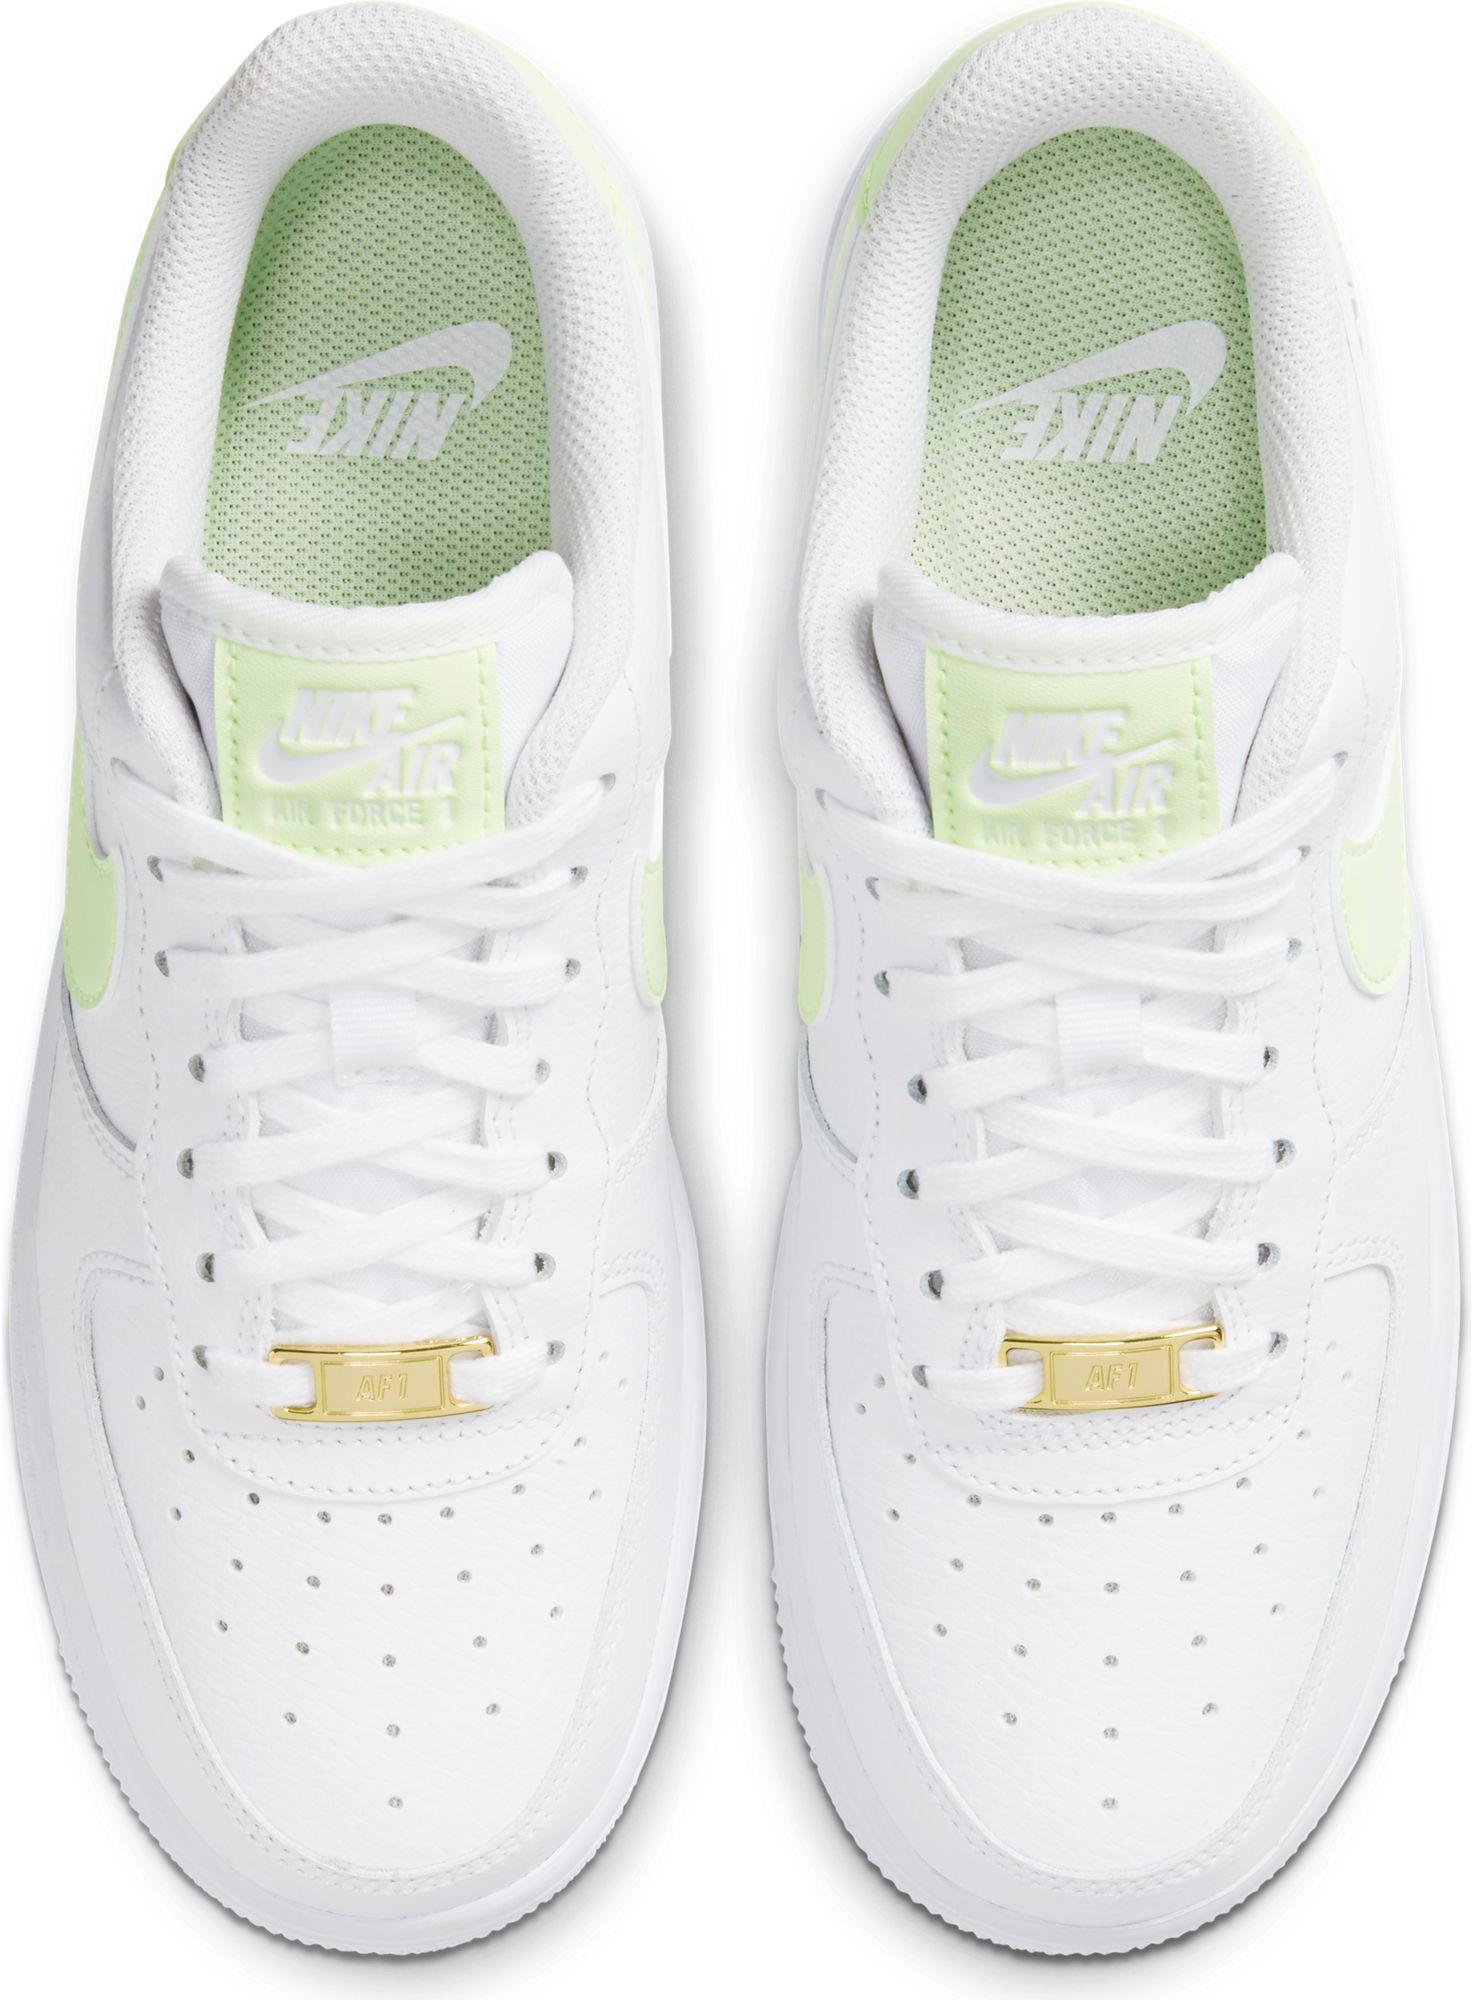 air force one white barely volt